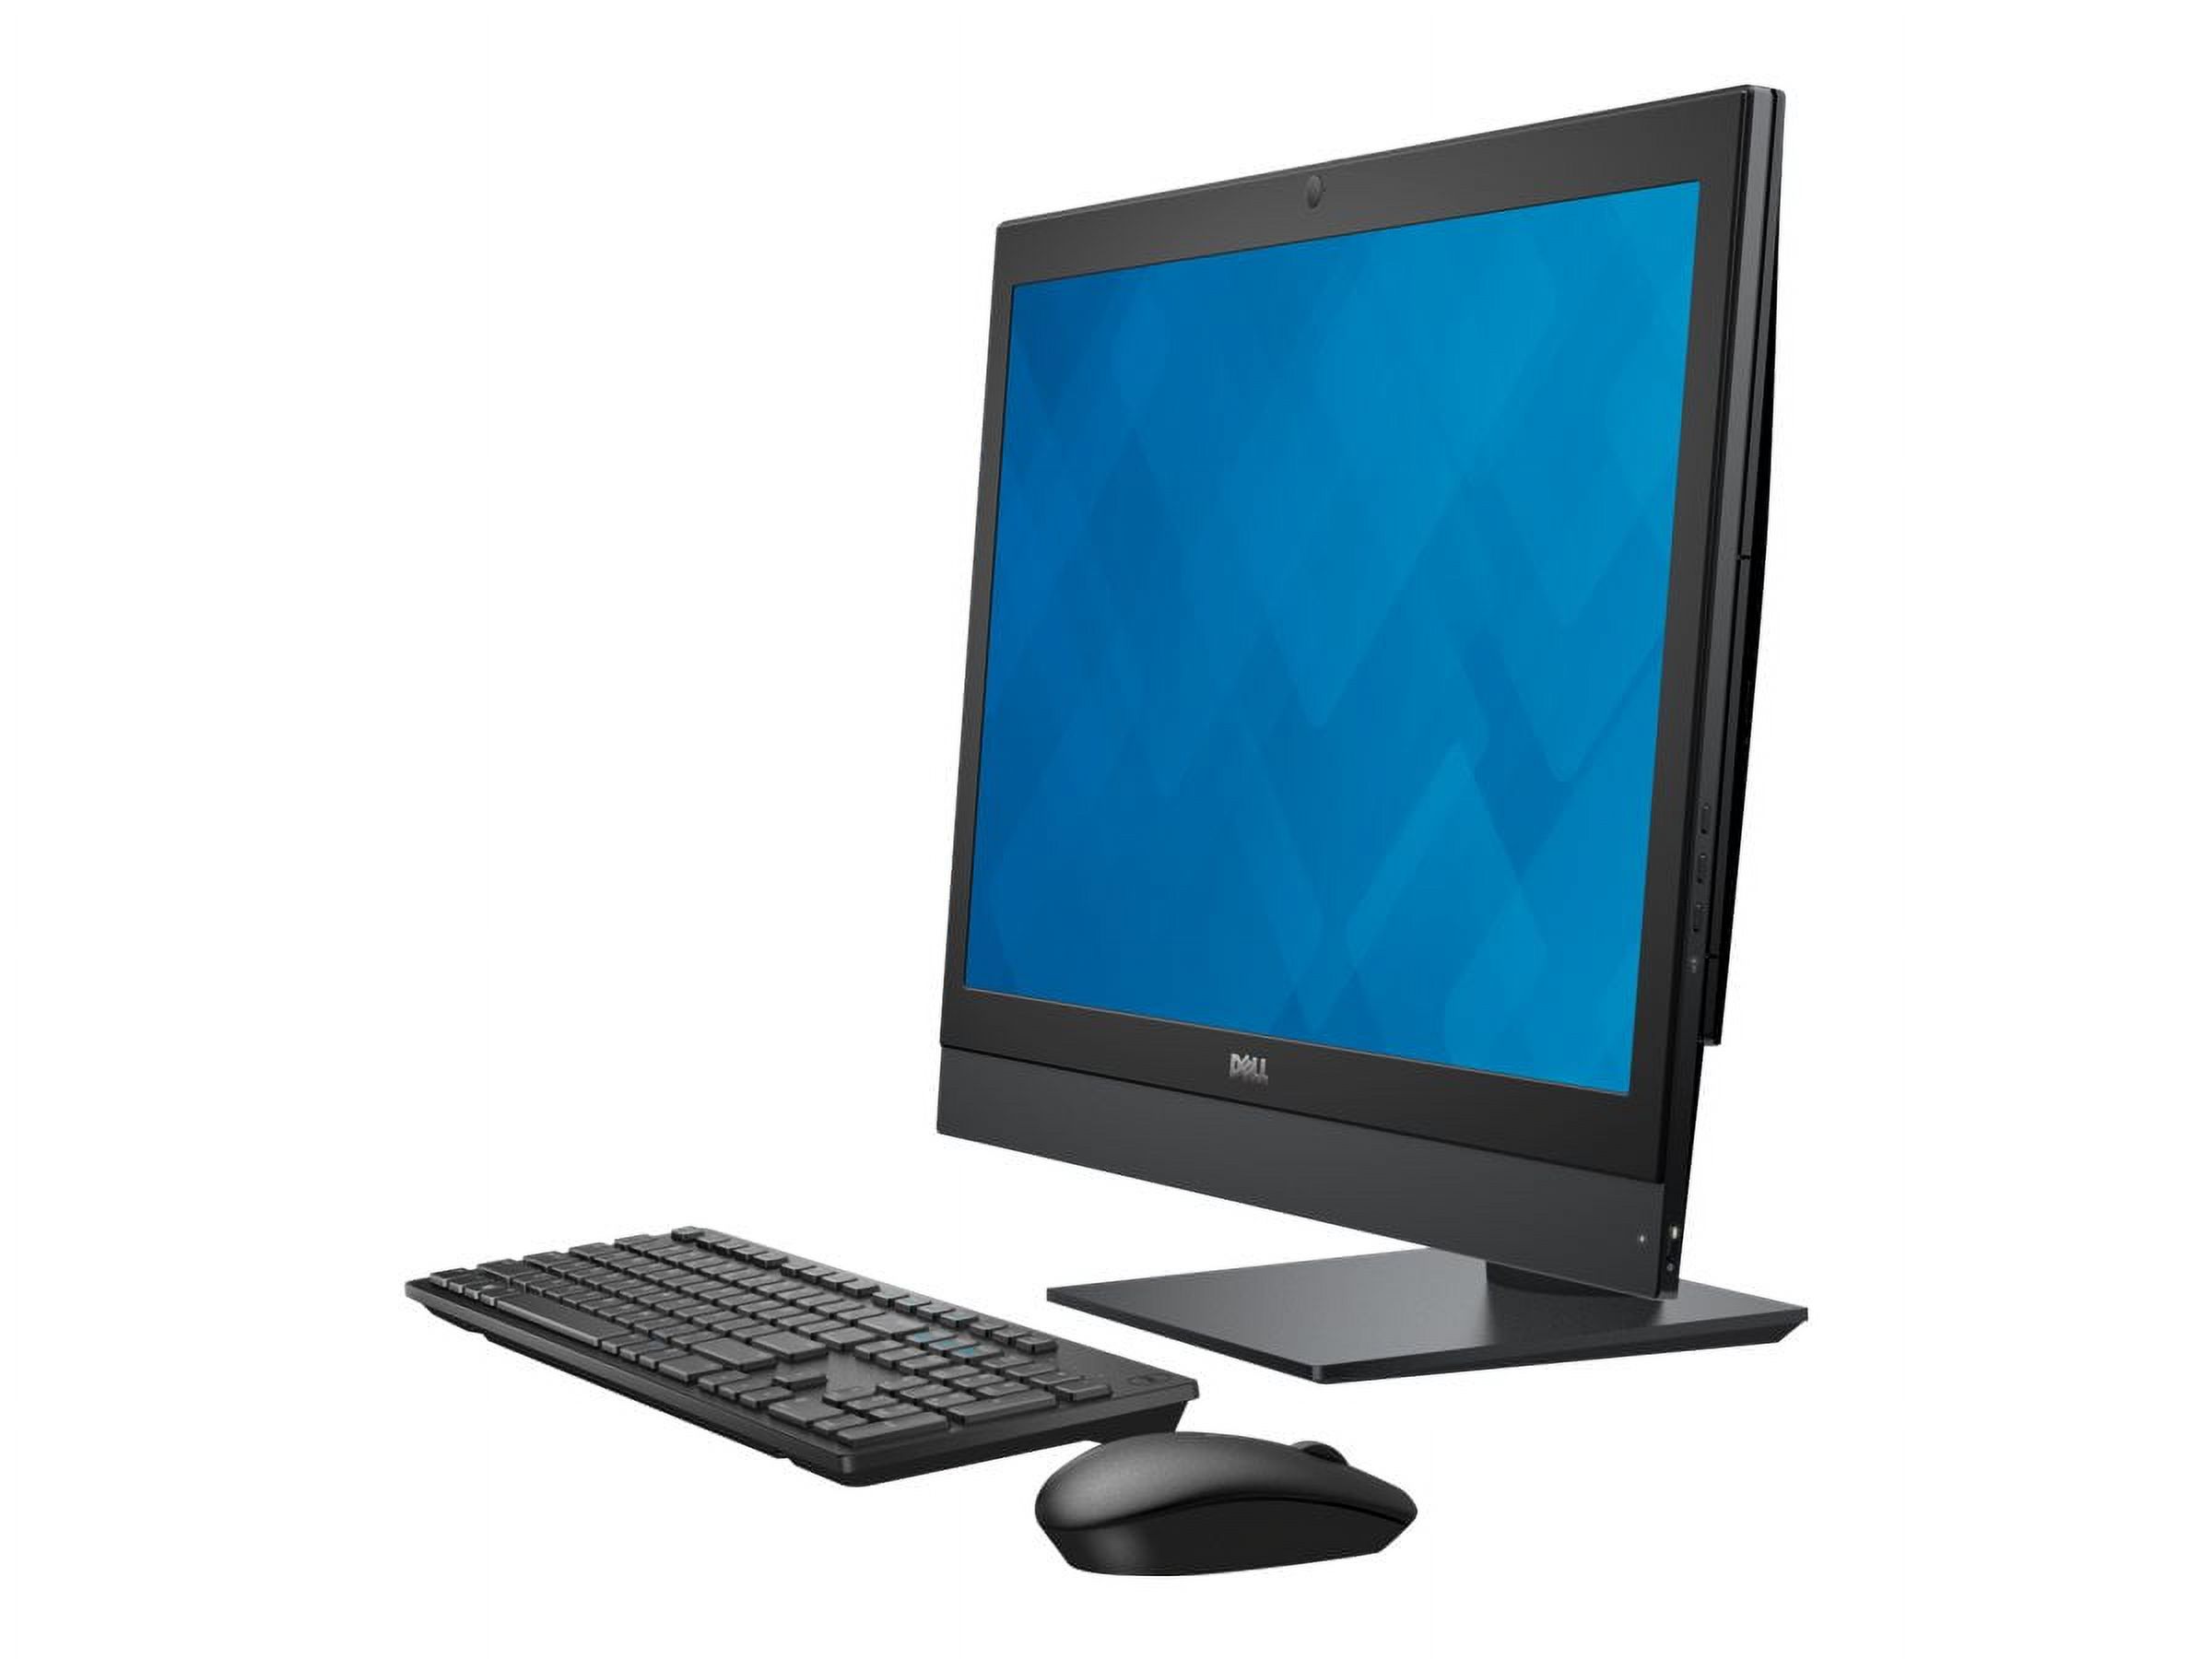 Dell OptiPlex 7440 - All-in-one - Core i5 6500 / 3.2 GHz - vPro - RAM 8 GB - HDD 500 GB - DVD-Writer - HD Graphics 530 - GigE - WLAN: 802.11a/b/g/n/ac, Bluetooth 4.1 - Win 7 Pro 64-bit (includes Win 10 Pro 64-bit License) - monitor: LED 23" 1920 x 1080 (Full HD) - keyboard: English - with 3 Years Hardware Service with Onsite/In-Home Service After Remote Diagnosis - image 3 of 8